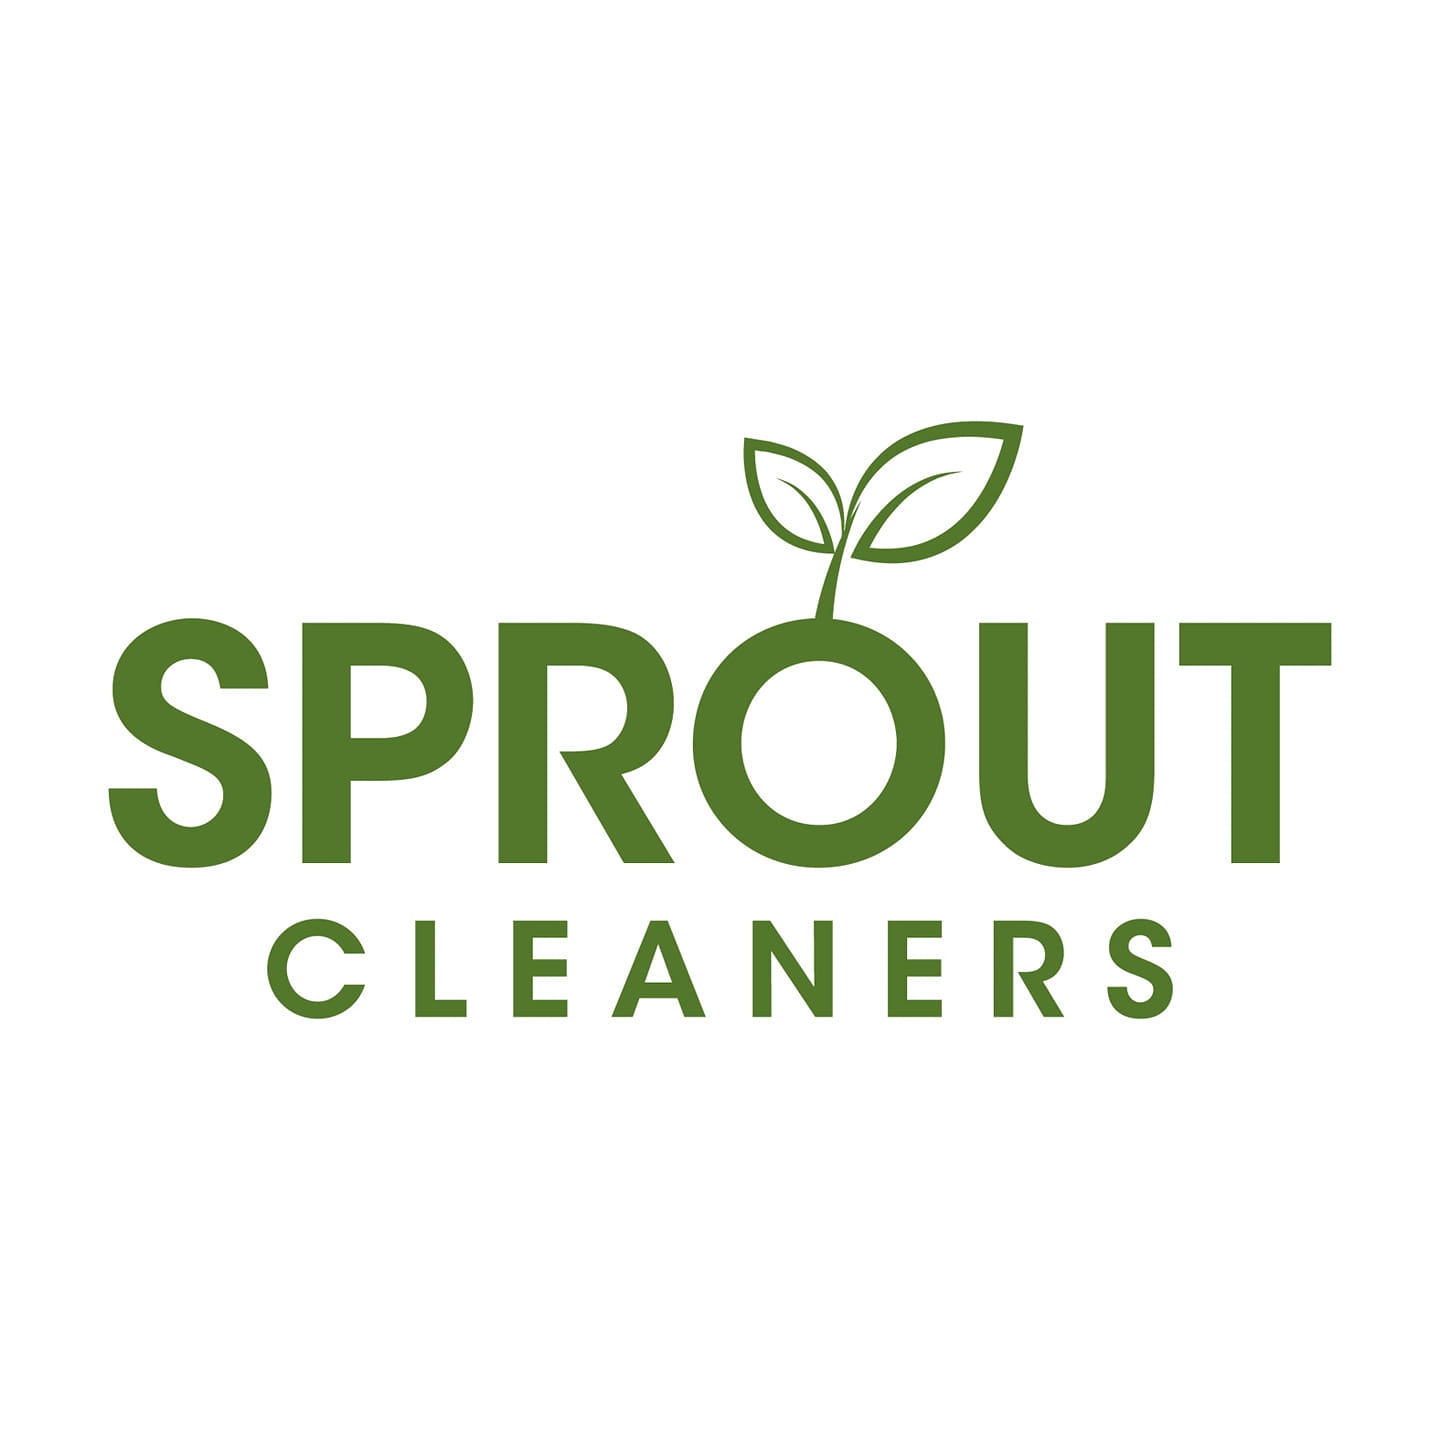 SPROUT DRY CLEANERS 263 Changebridge Rd #9, Pine Brook New Jersey 07058